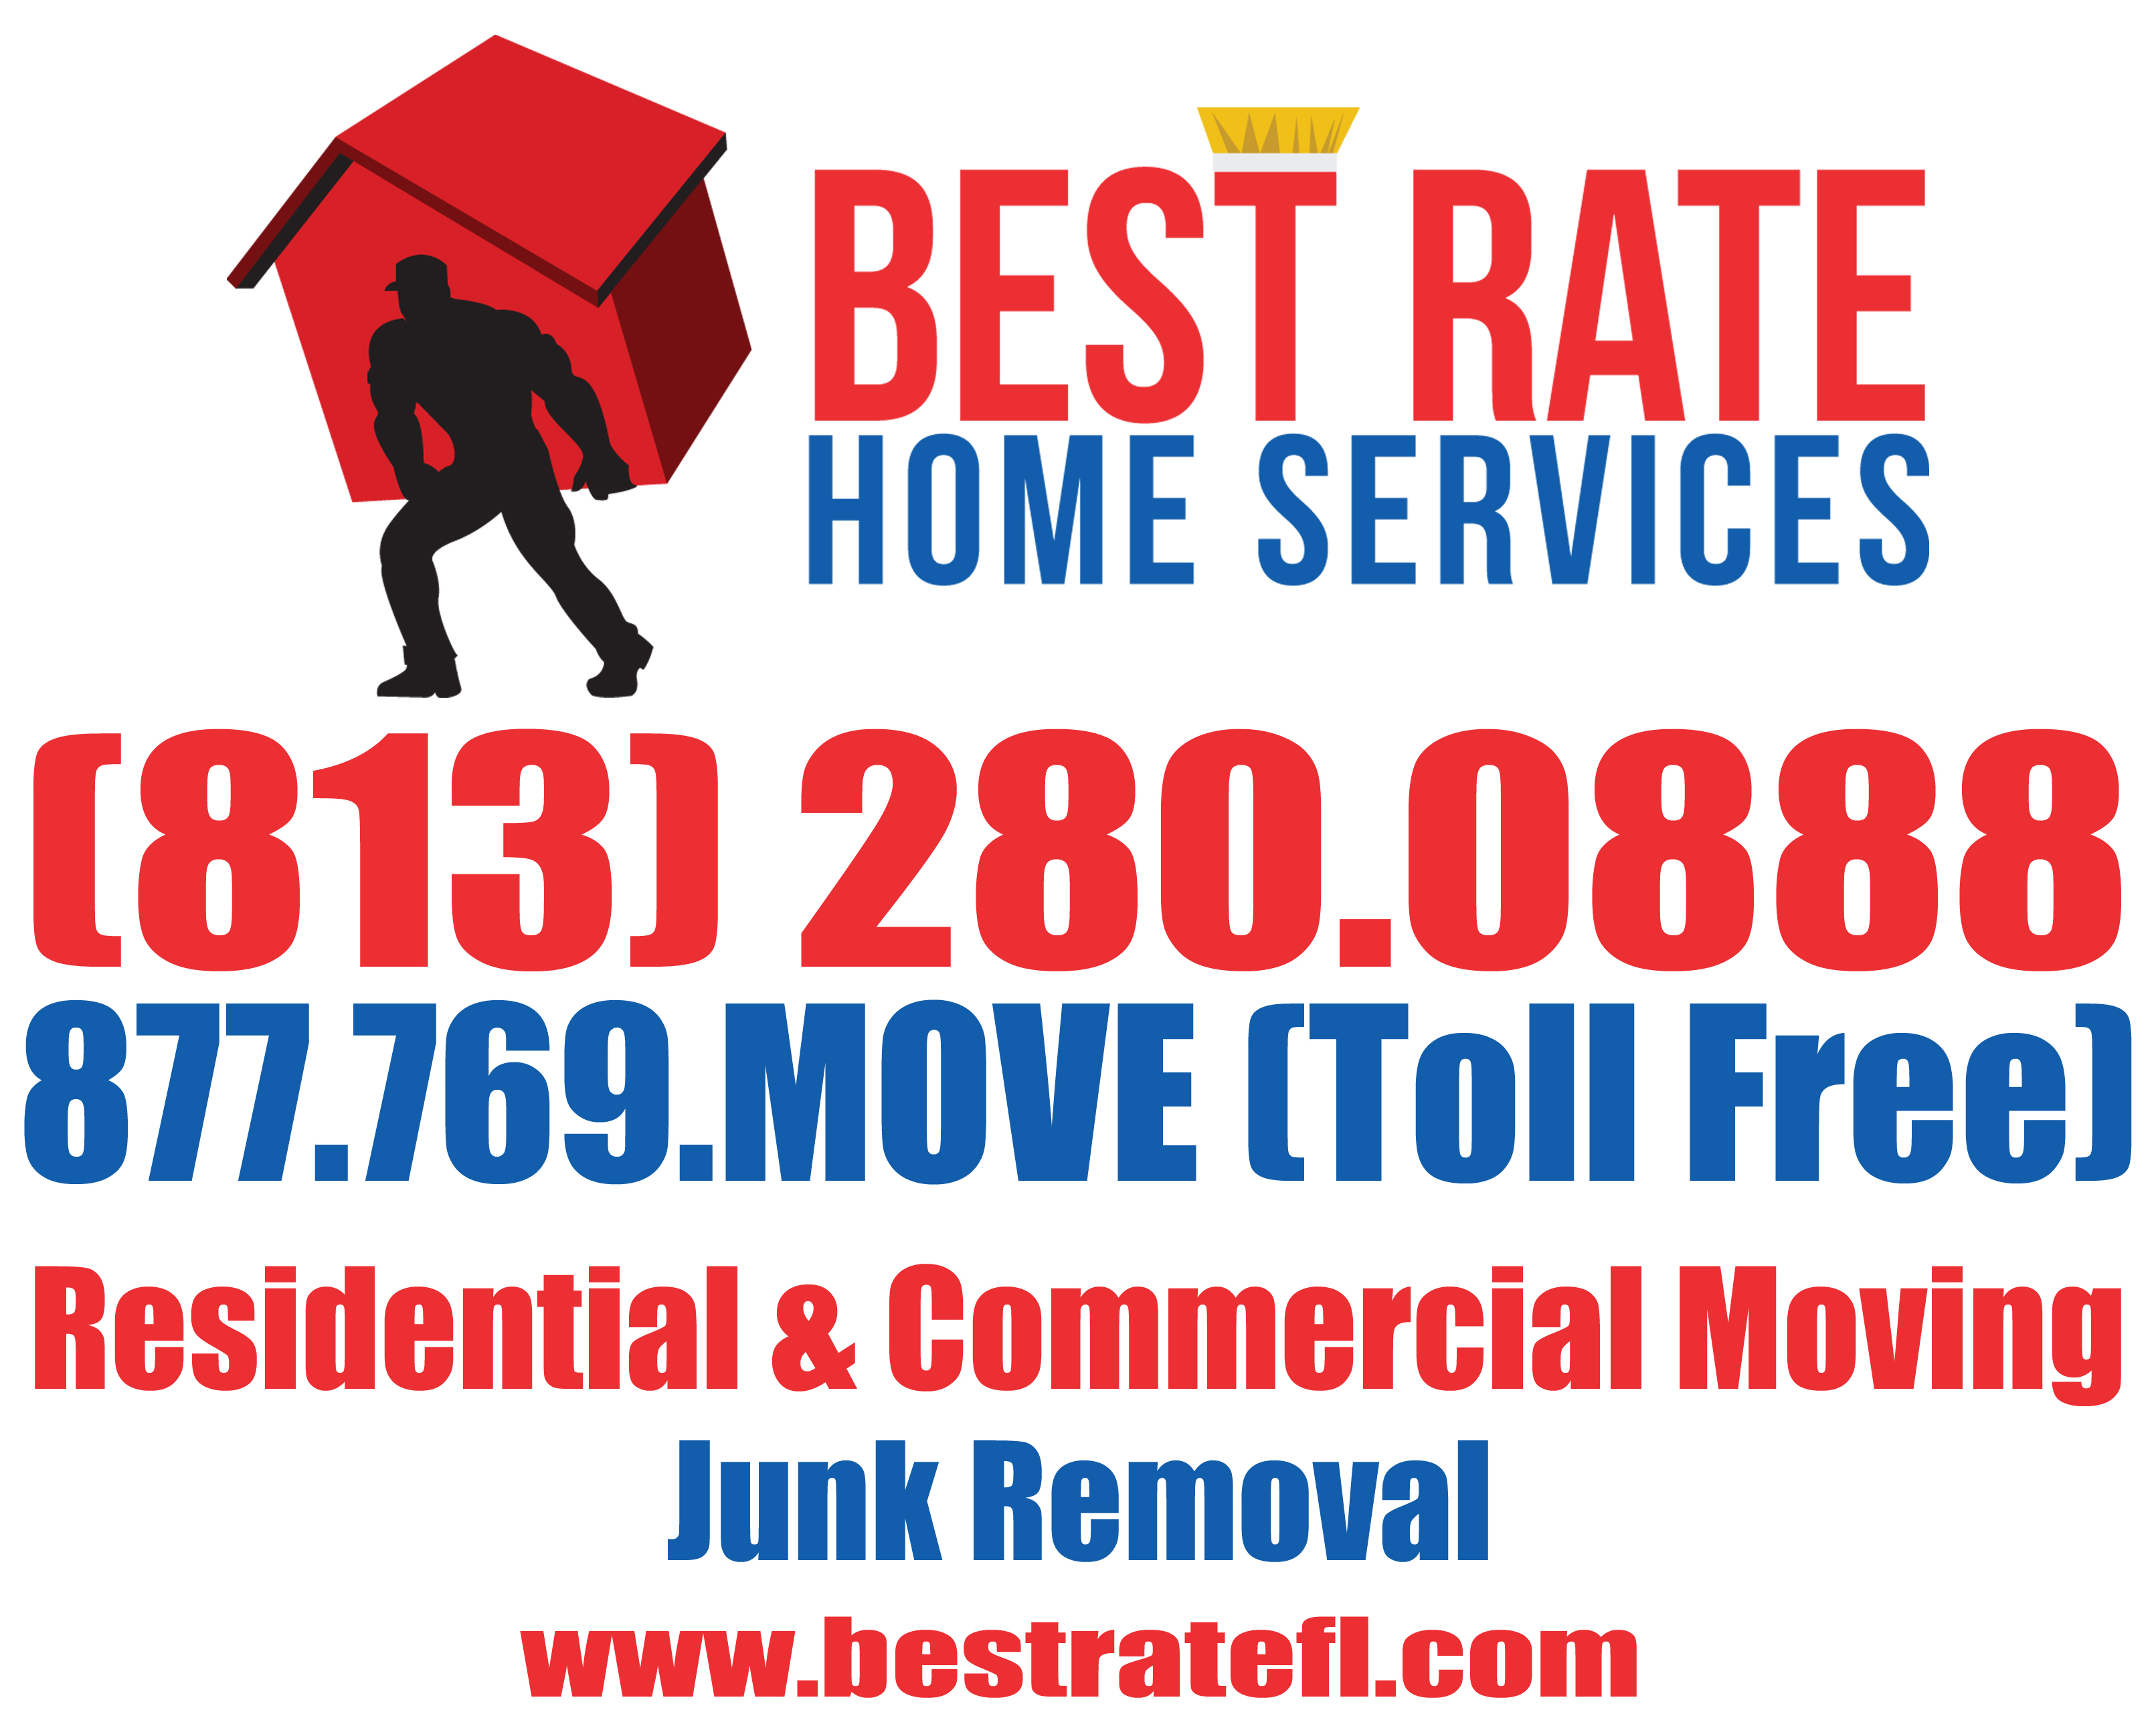 Best Rate Home Services, Inc